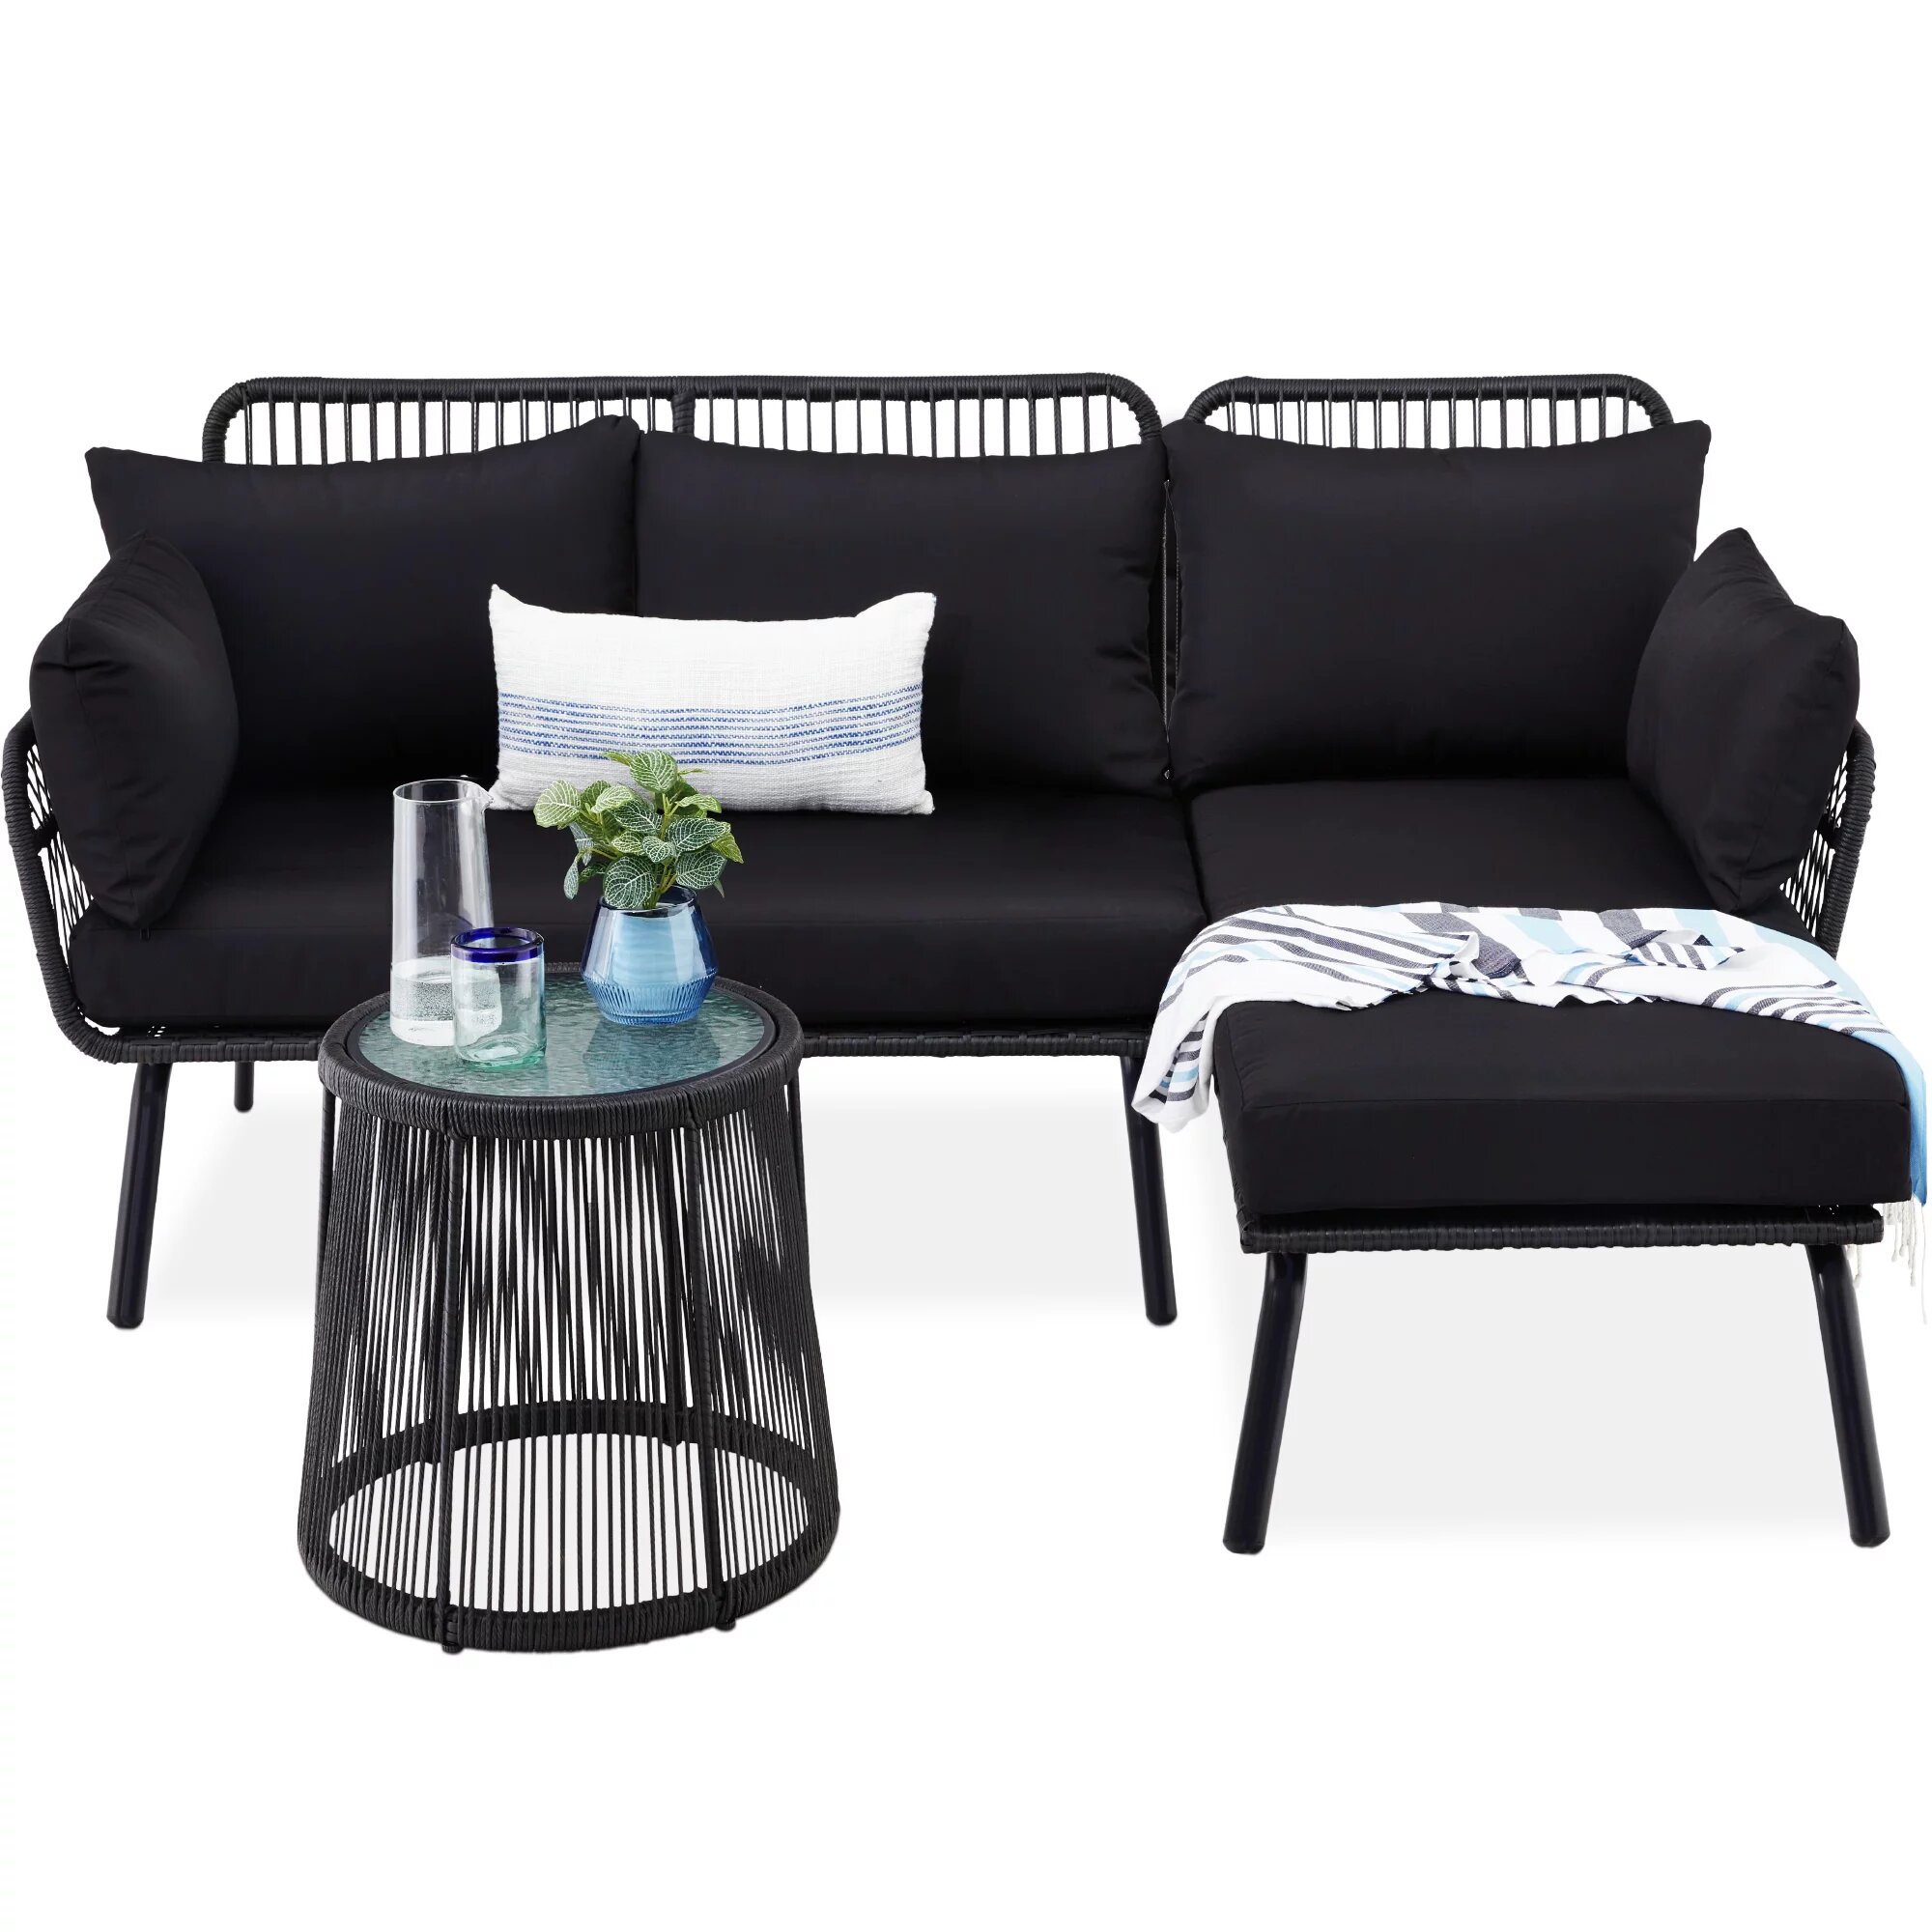 LOCCUS Outdoor Living with Our Comfortable L-Shaped Conversation Sofa Set Rope.